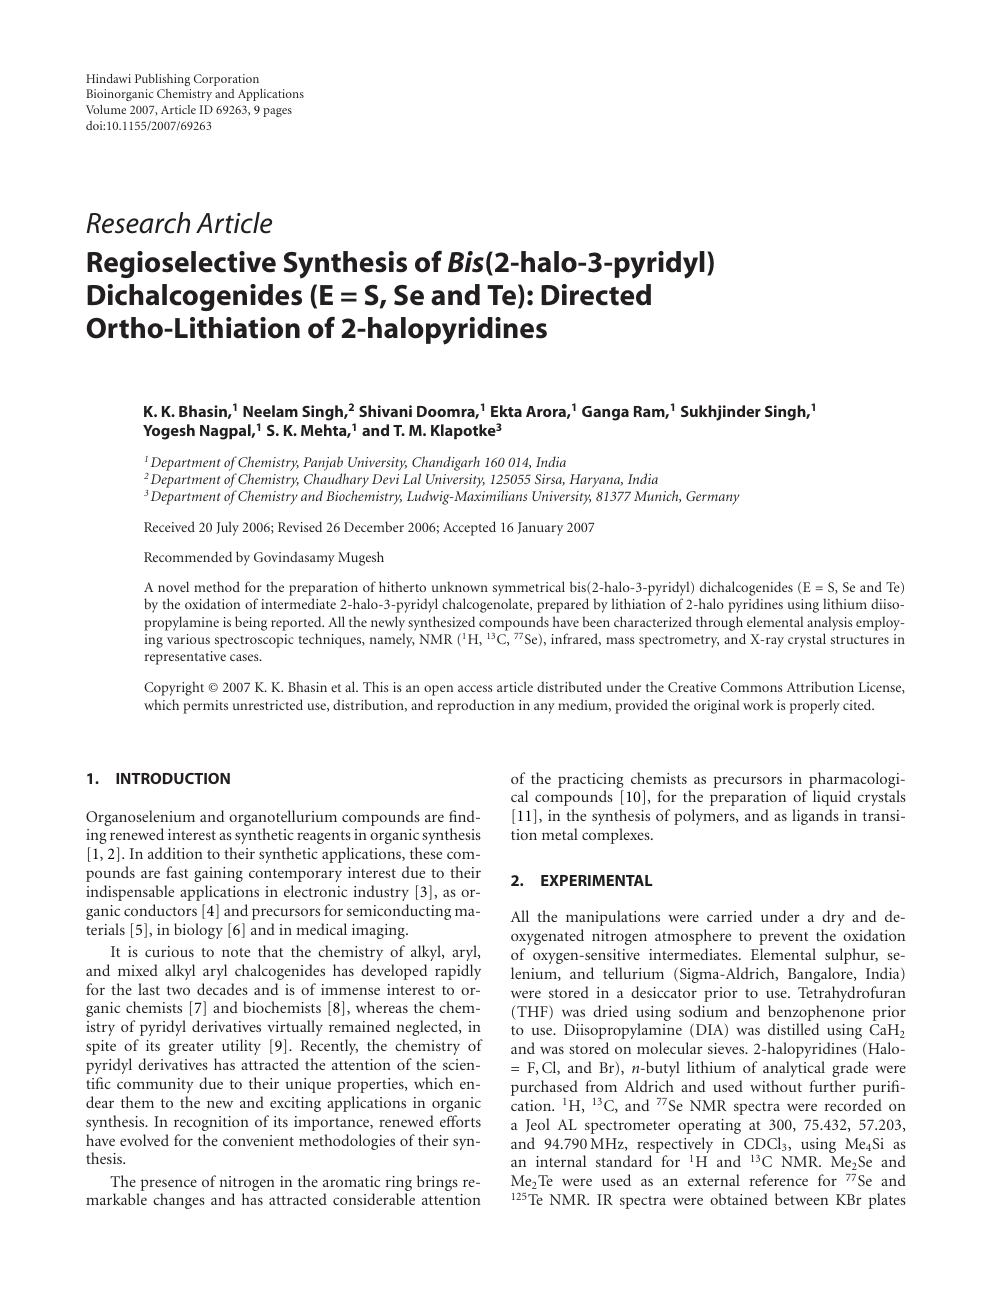 Regioselective Synthesis Of Bis 2 Halo 3 Pyridyl Dichalcogenides E S Se And Te Directed Ortho Lithiation Of 2 Halopyridines Topic Of Research Paper In Chemical Sciences Download Scholarly Article Pdf And Read For Free On